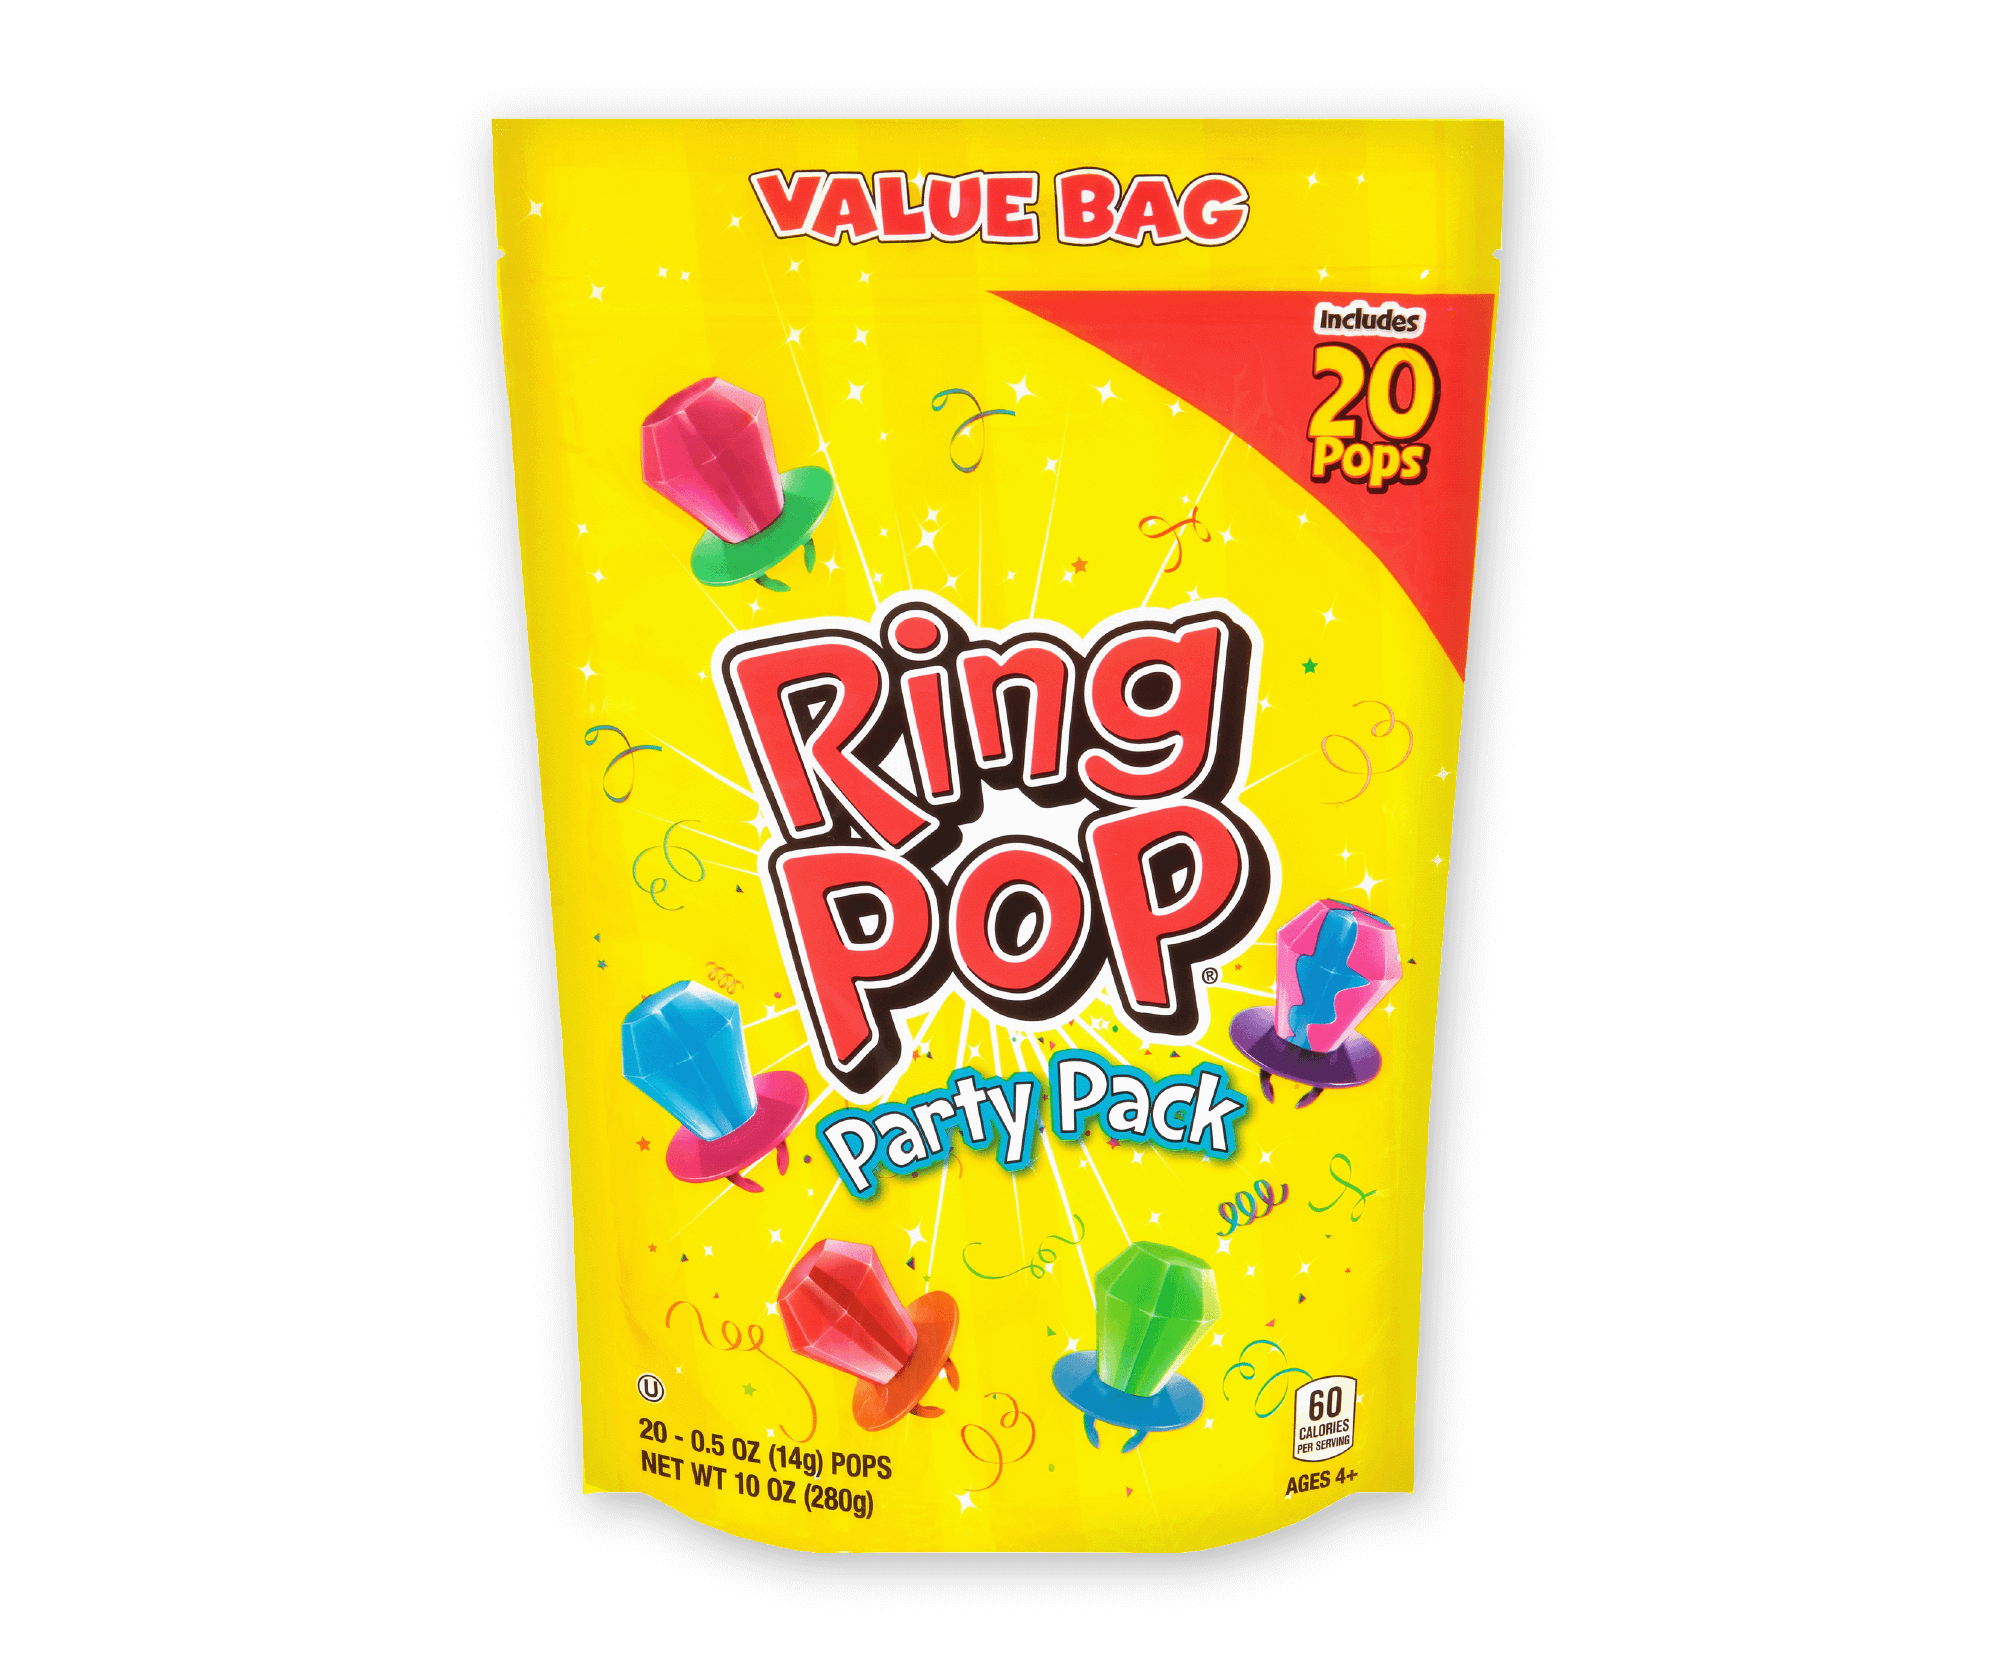 Ring Pop® Party Pack